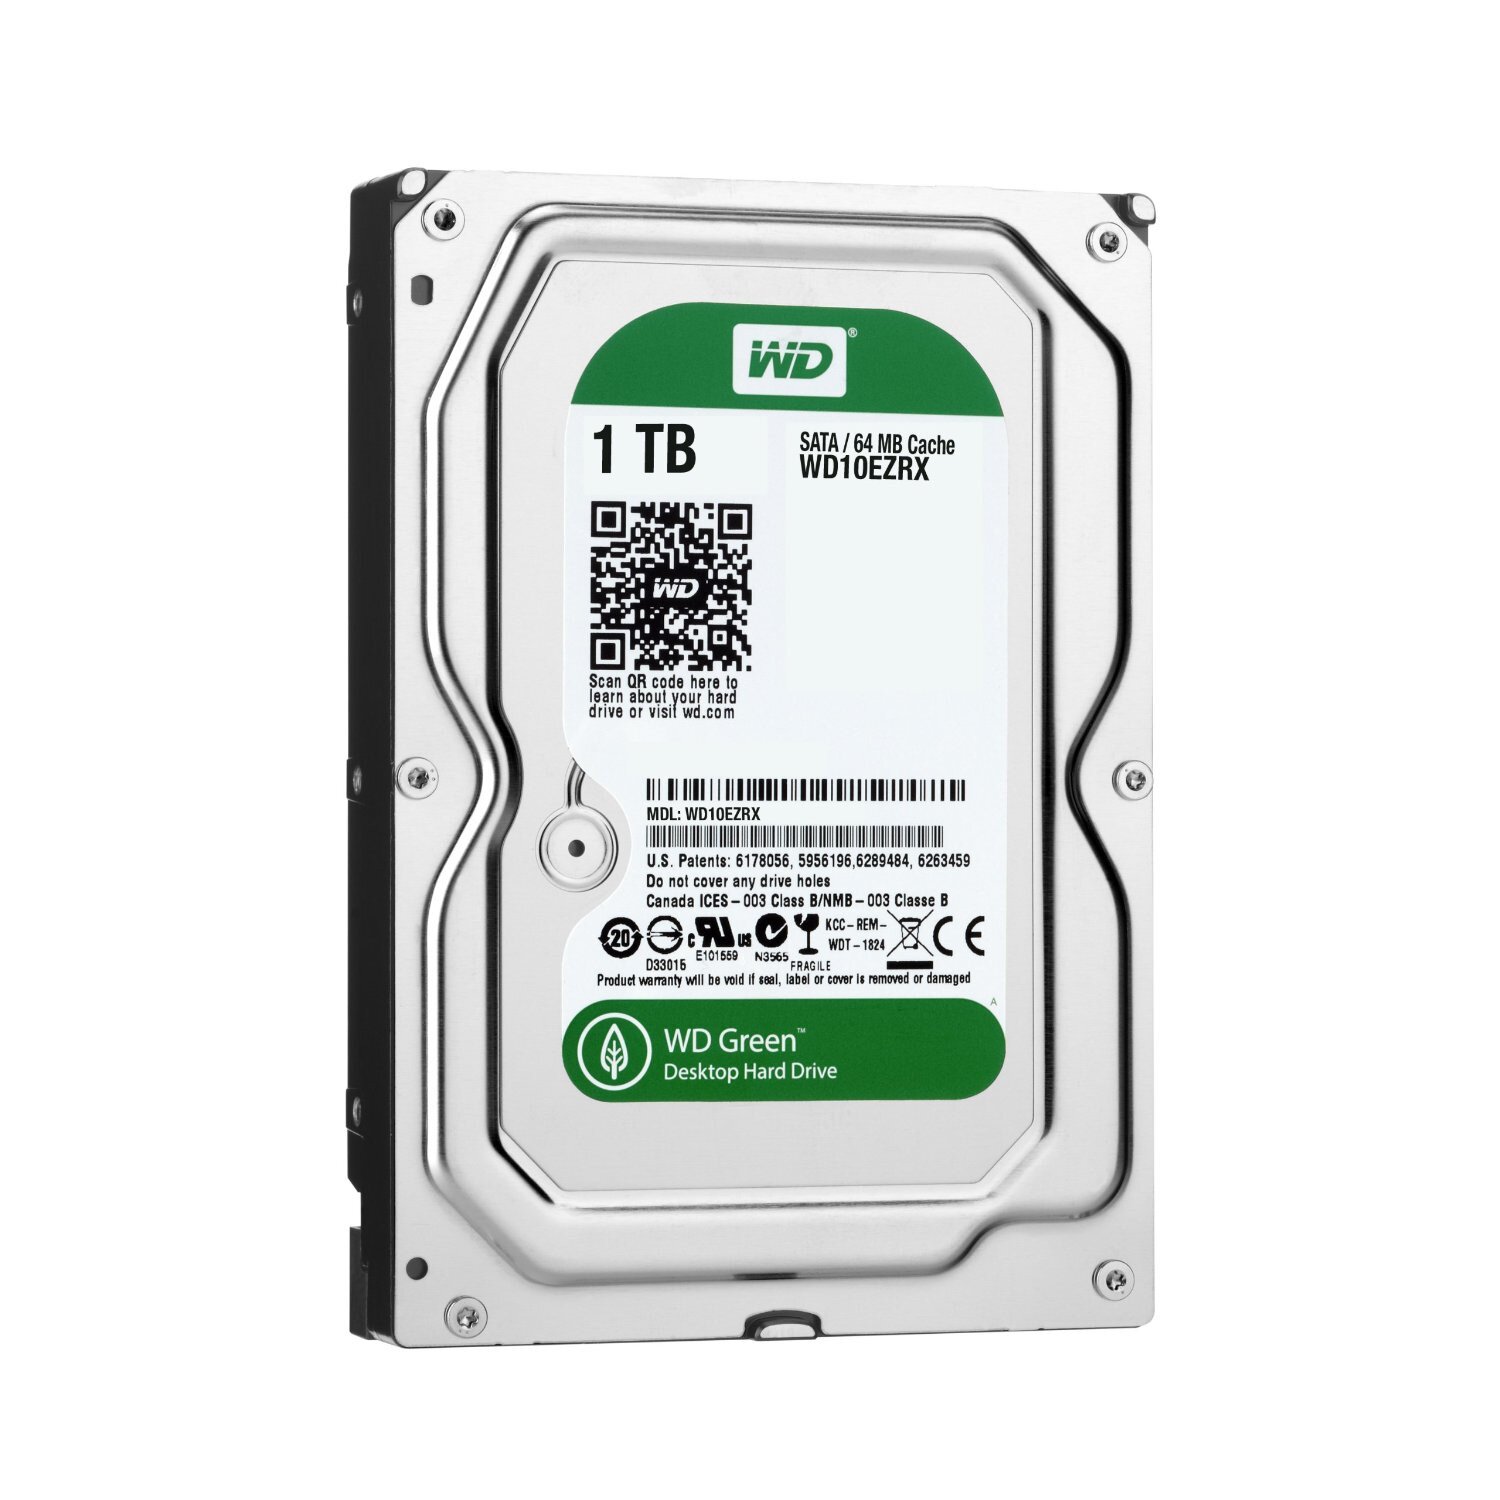 Western Digital WD10EZRX Hard Disk Drive: Product Overview, Technical Specifications, Compatibility